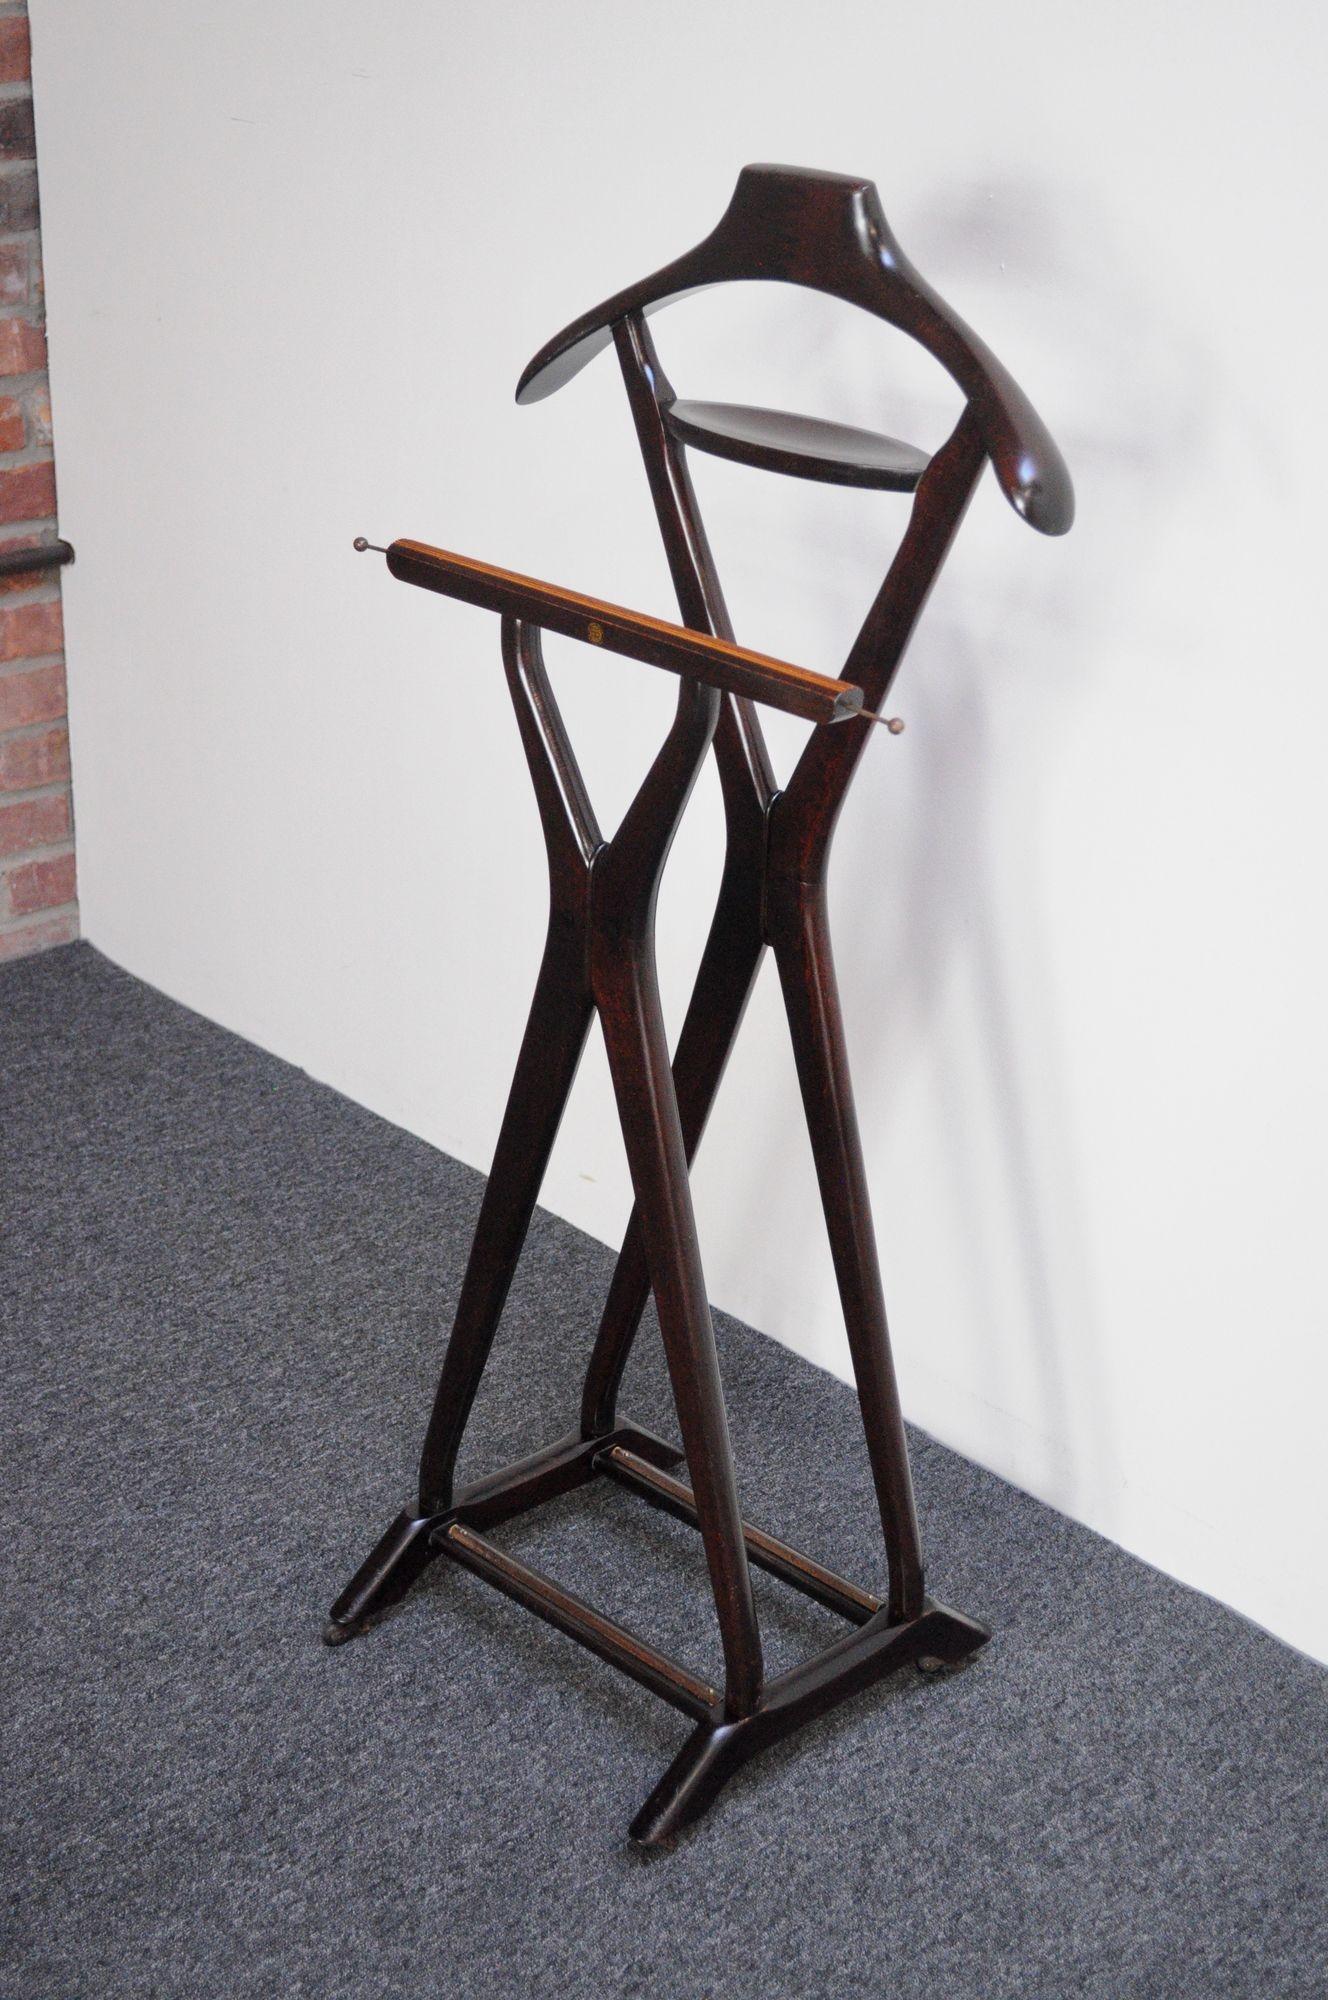 This Italian valet was designed by Fratelli Reguitti in the 1950s. This design is often mis-attributed to Ico Parisi, who used these valets for styling but never actually designed them.
Early example composed of a sculptural 'x' frame with hanger